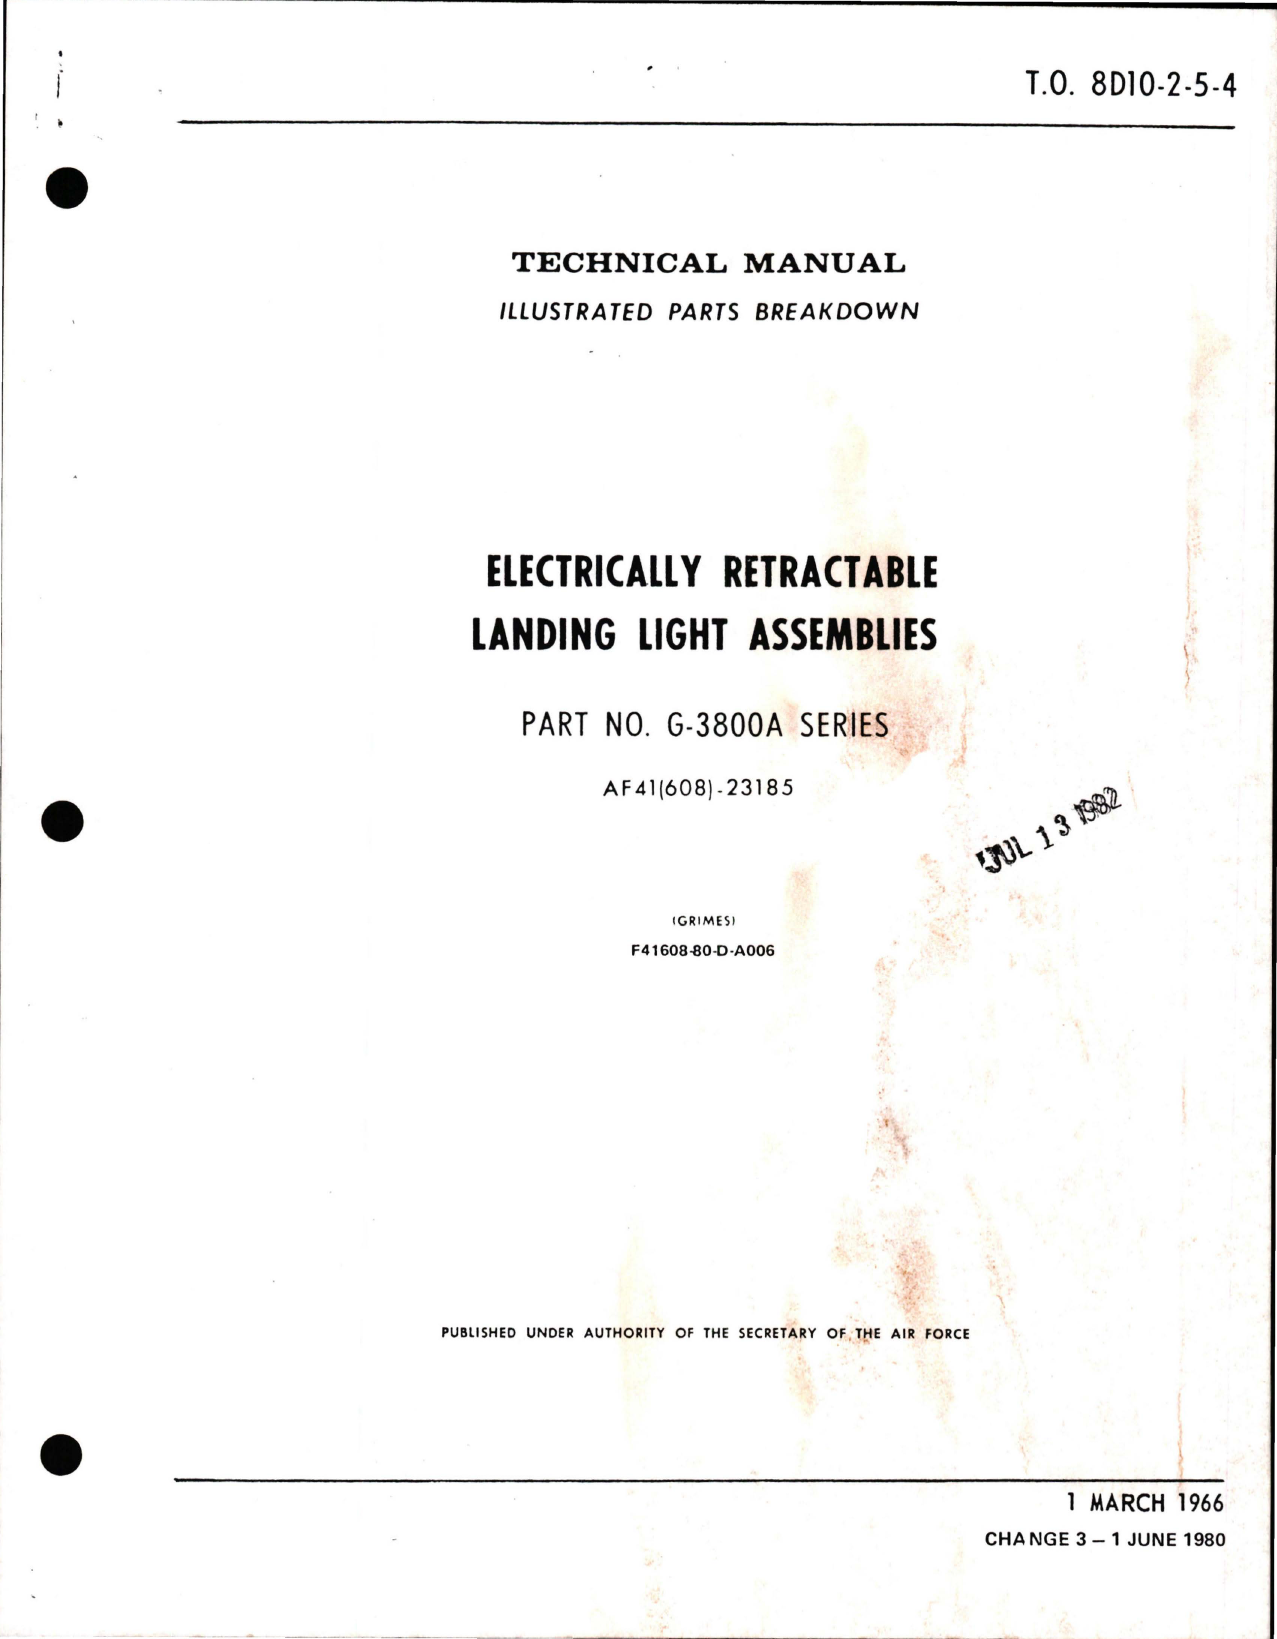 Sample page 1 from AirCorps Library document: Illustrated Parts Breakdown for Electrically Retractable Landing Light Assemblies - Part G-3800A Series - Change 3